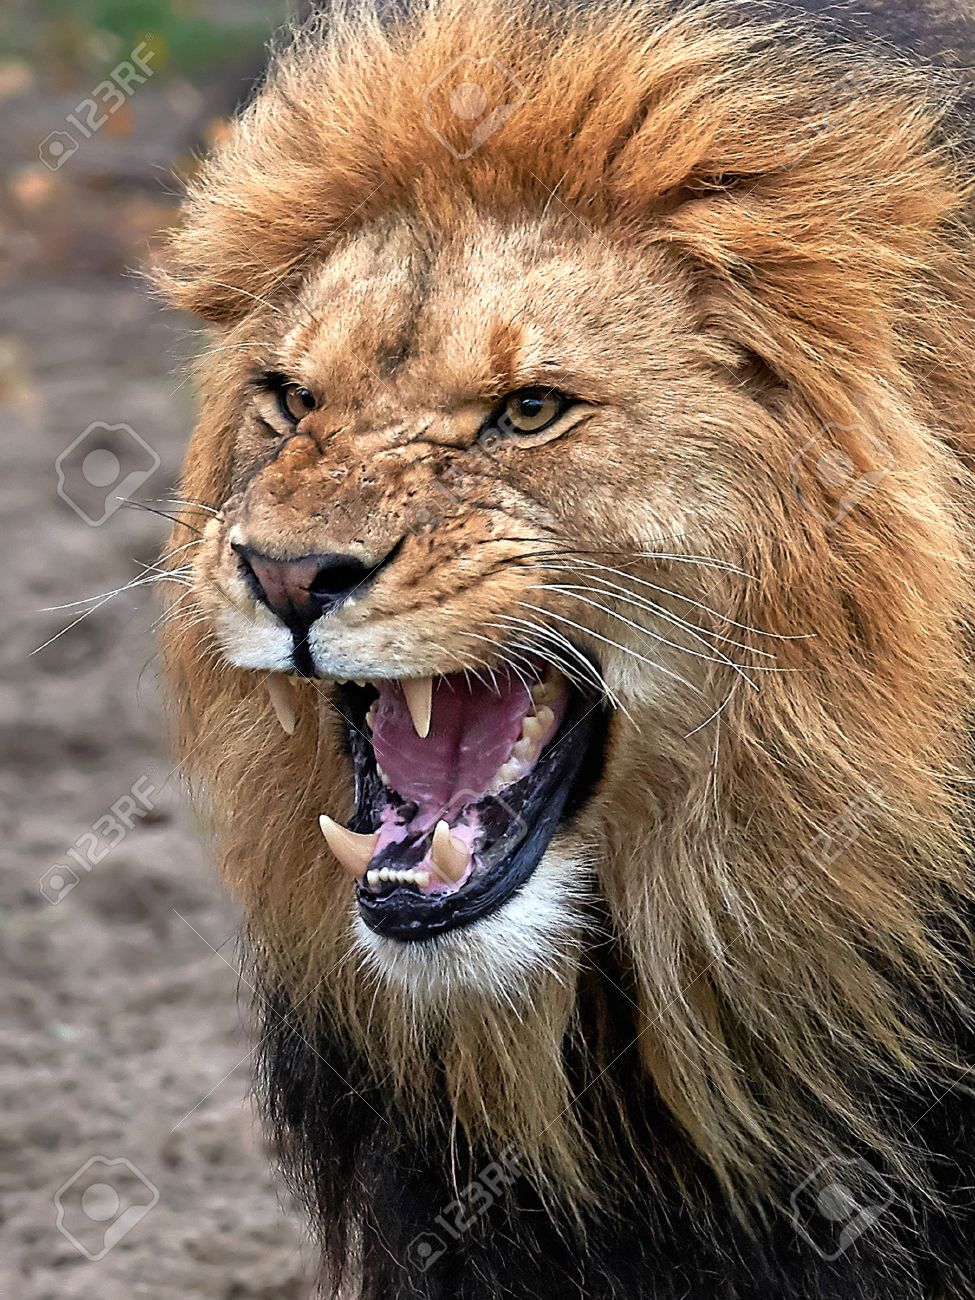 33922486-closeup-of-a-angry-lion-with-open-mouth-and-showing-teeth.jpg